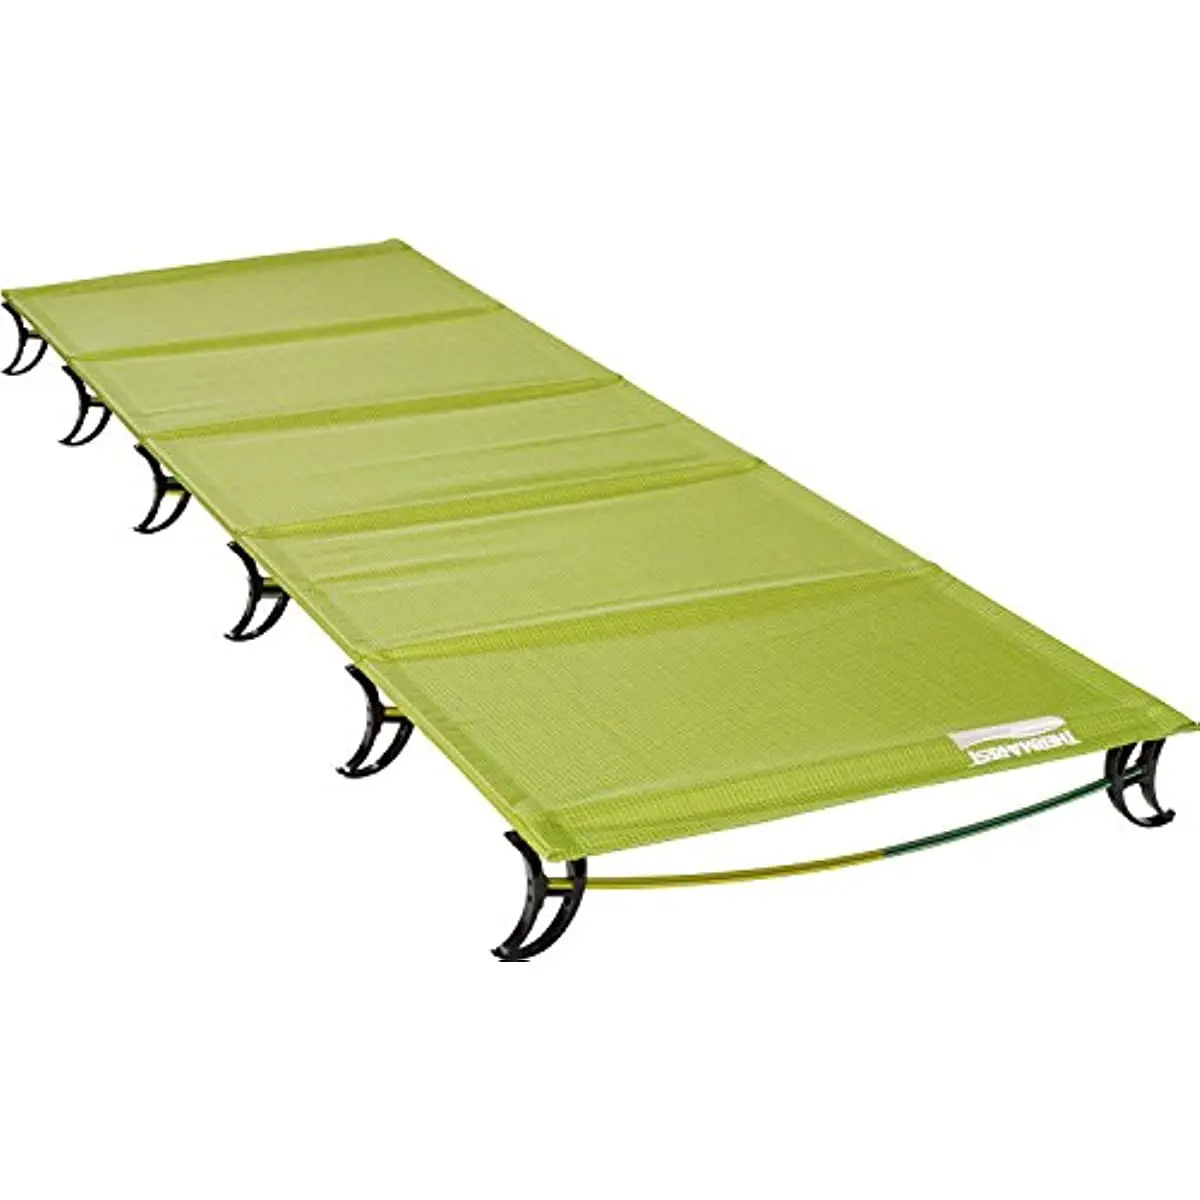 

Therm-a-Rest Ultralite Cot camping bed camping equipment US(Origin)